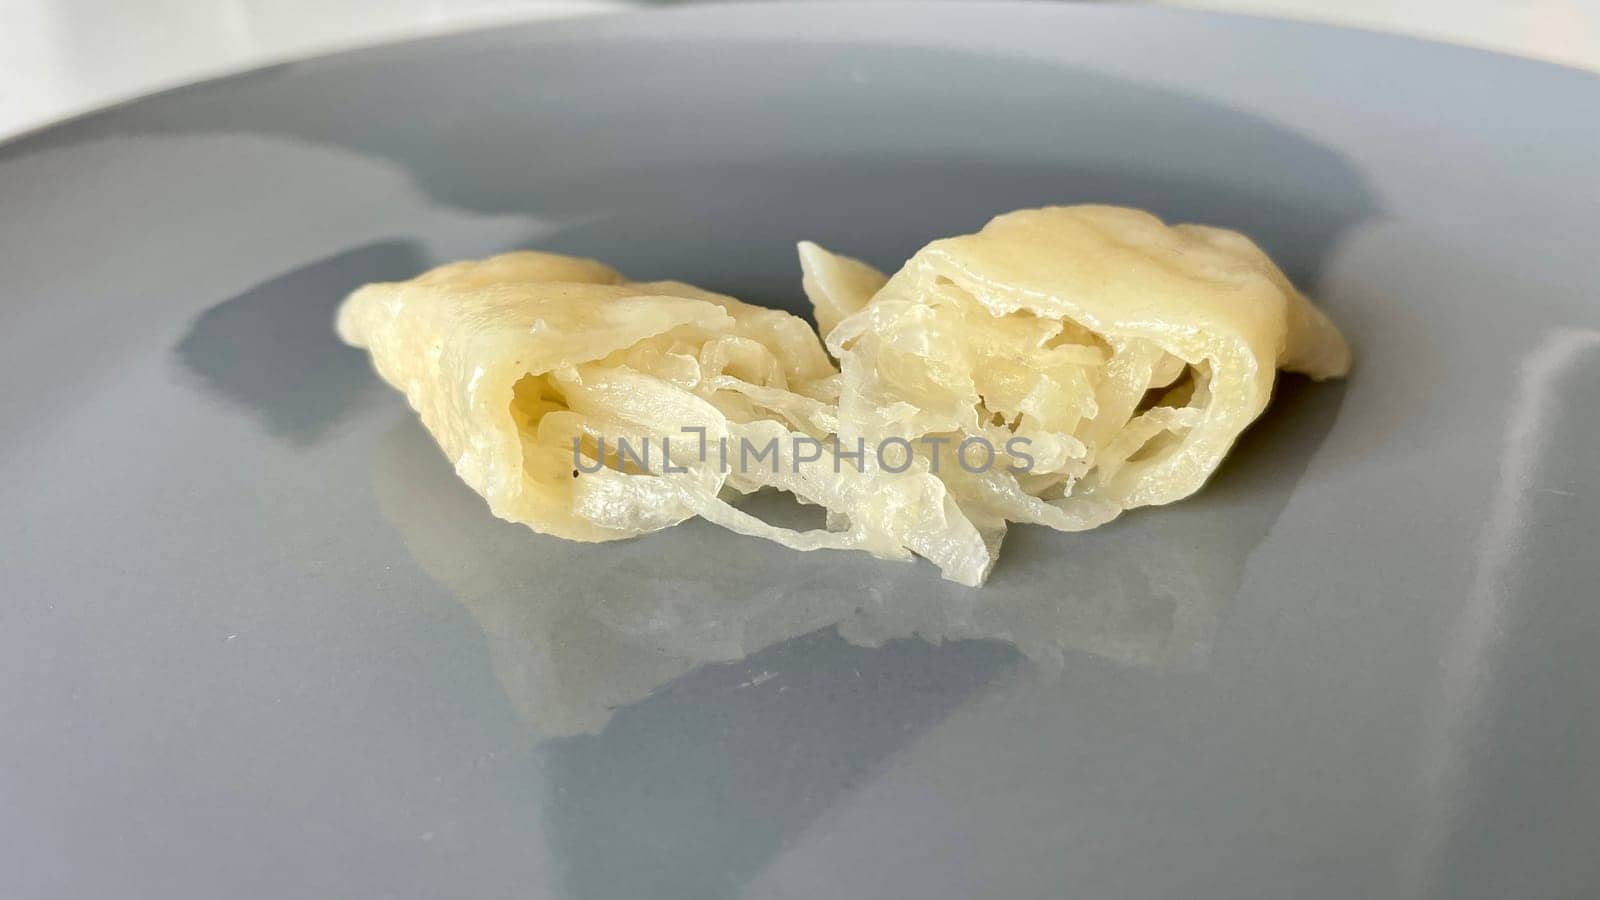 Dumplings with cabbage cut in half on a gray plate. High quality photo